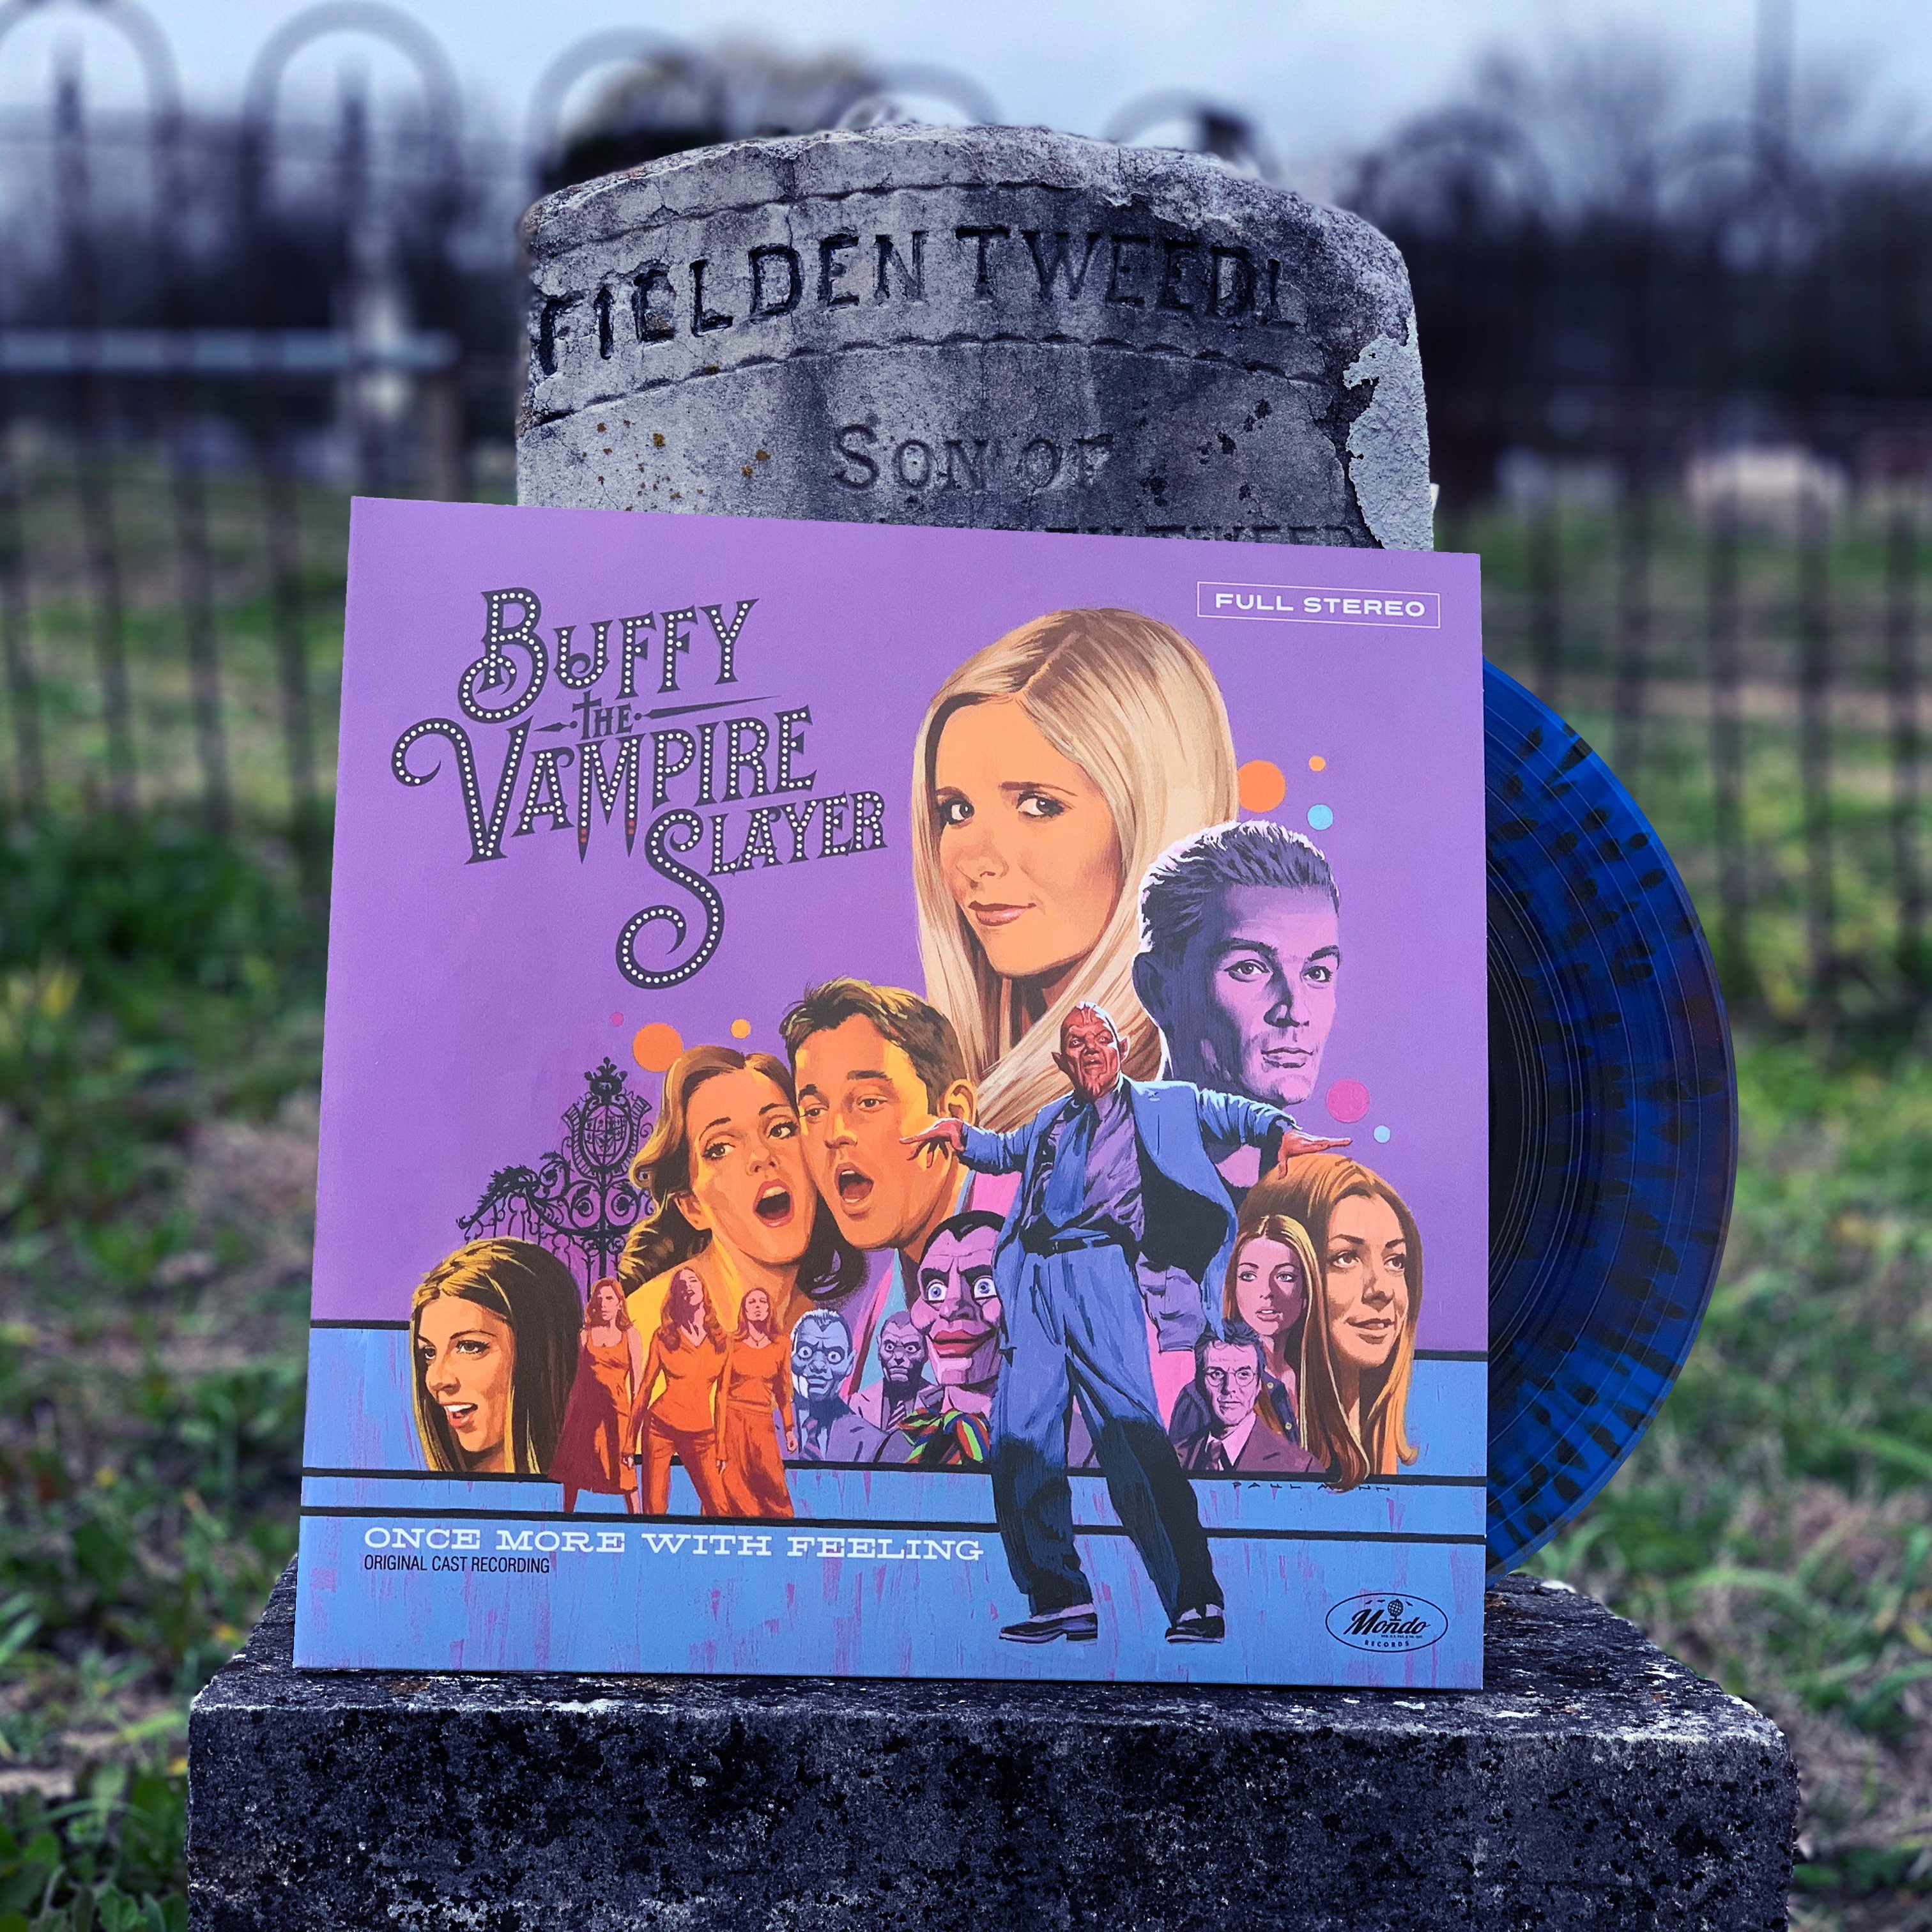 Buffy the Slayer on Twitter: "Another Here's your chance to win the brand new “Once More with Feeling” Vinyl. are simple: Follow us, @SwagByFox &amp; @MondoNews Like this